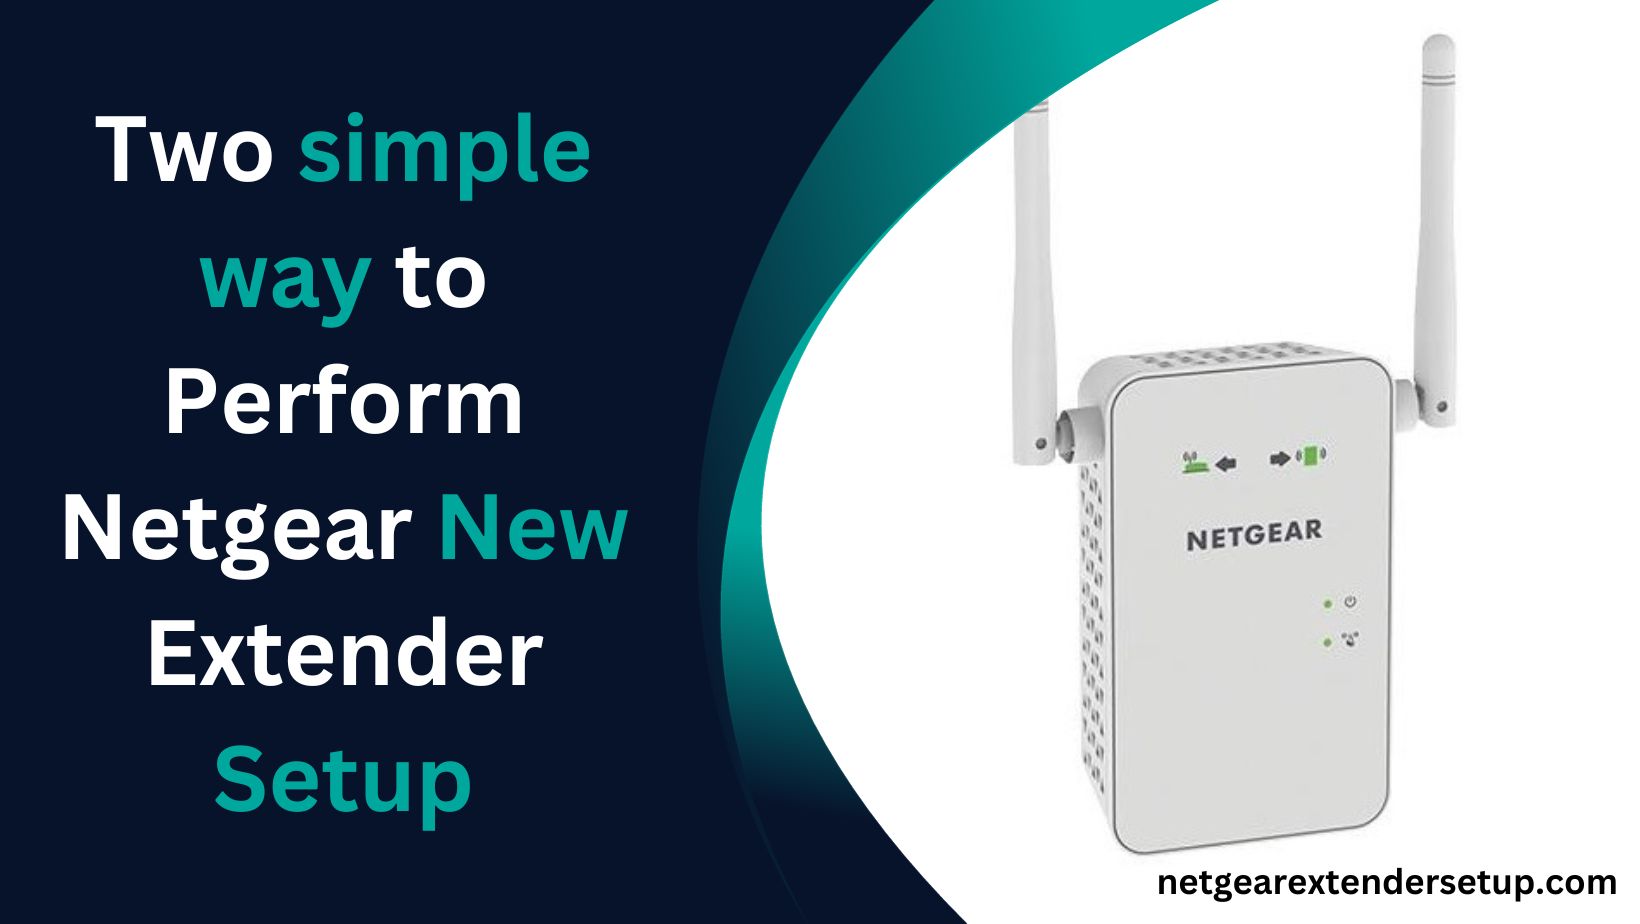 You are currently viewing Two simple way to Perform Netgear New Extender Setup